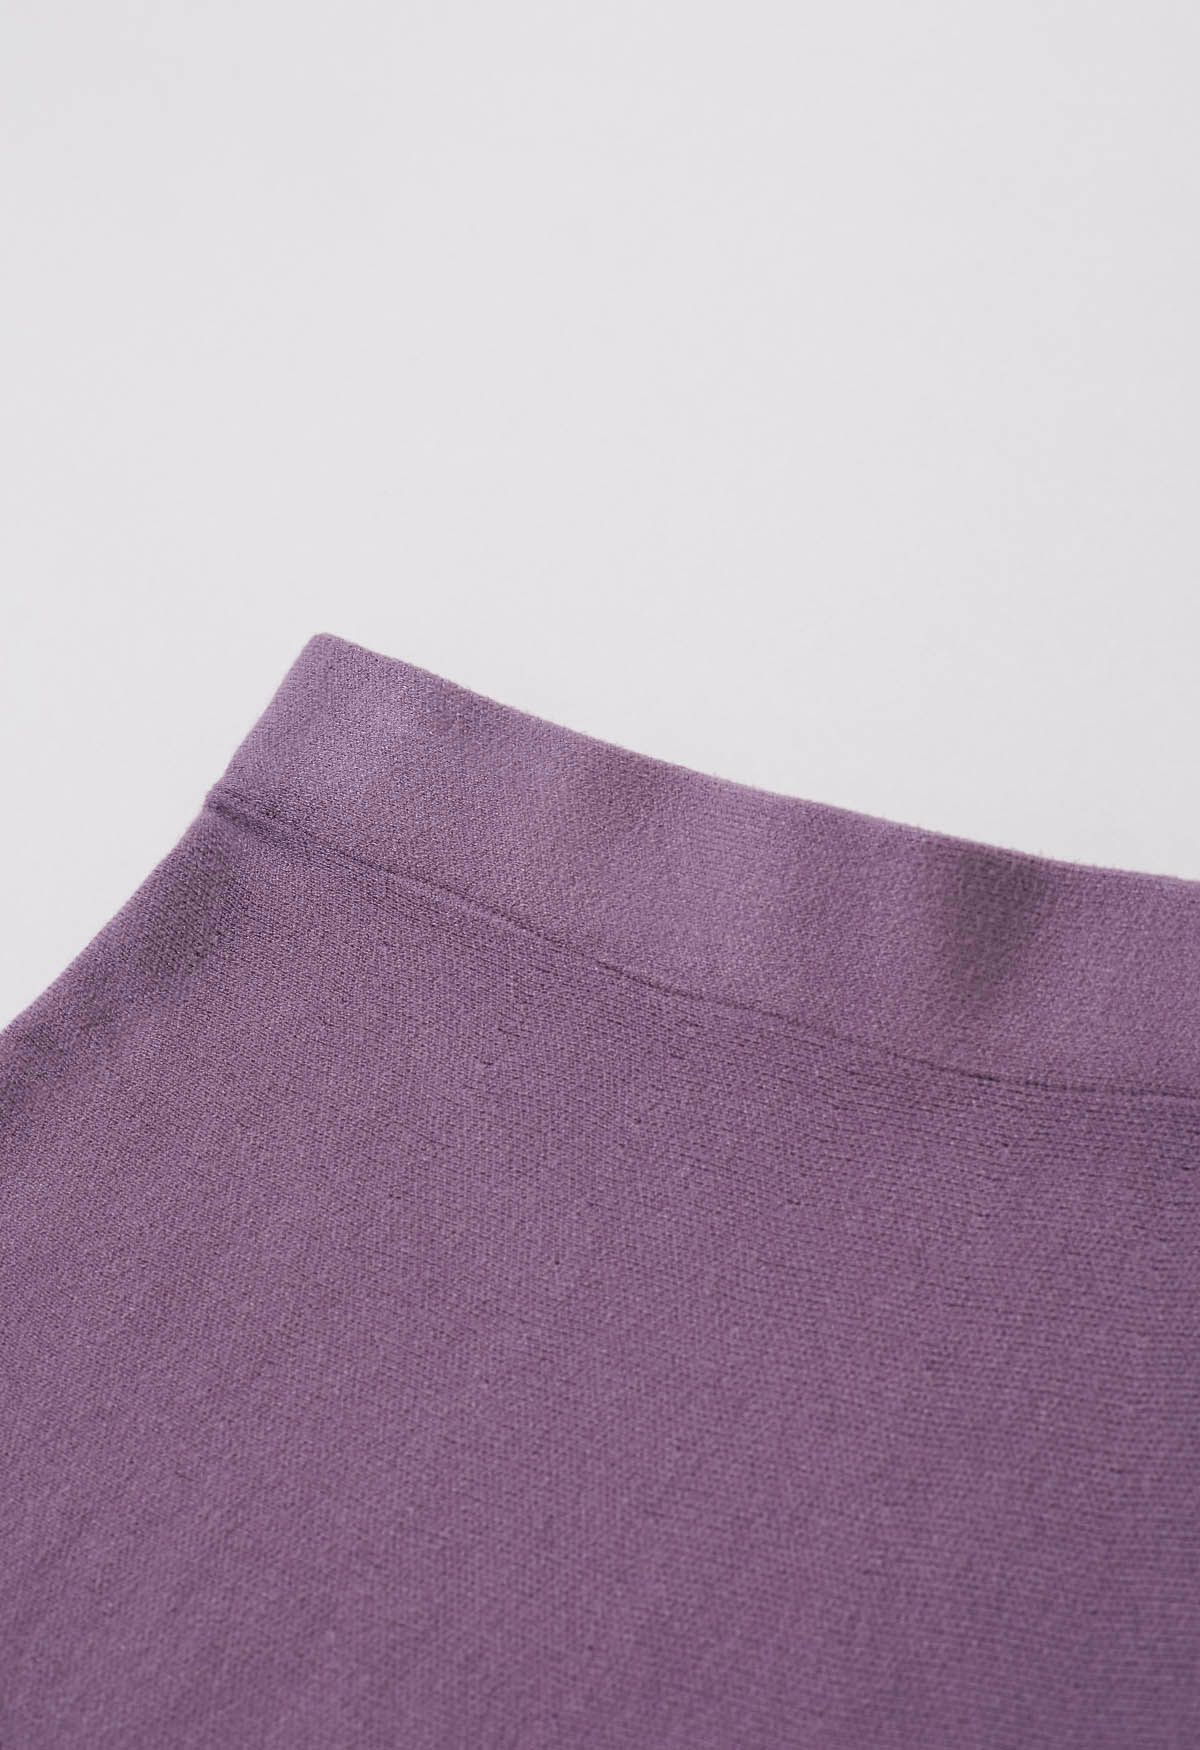 Solid Color A-Line Knit Midi Skirt in Lilac